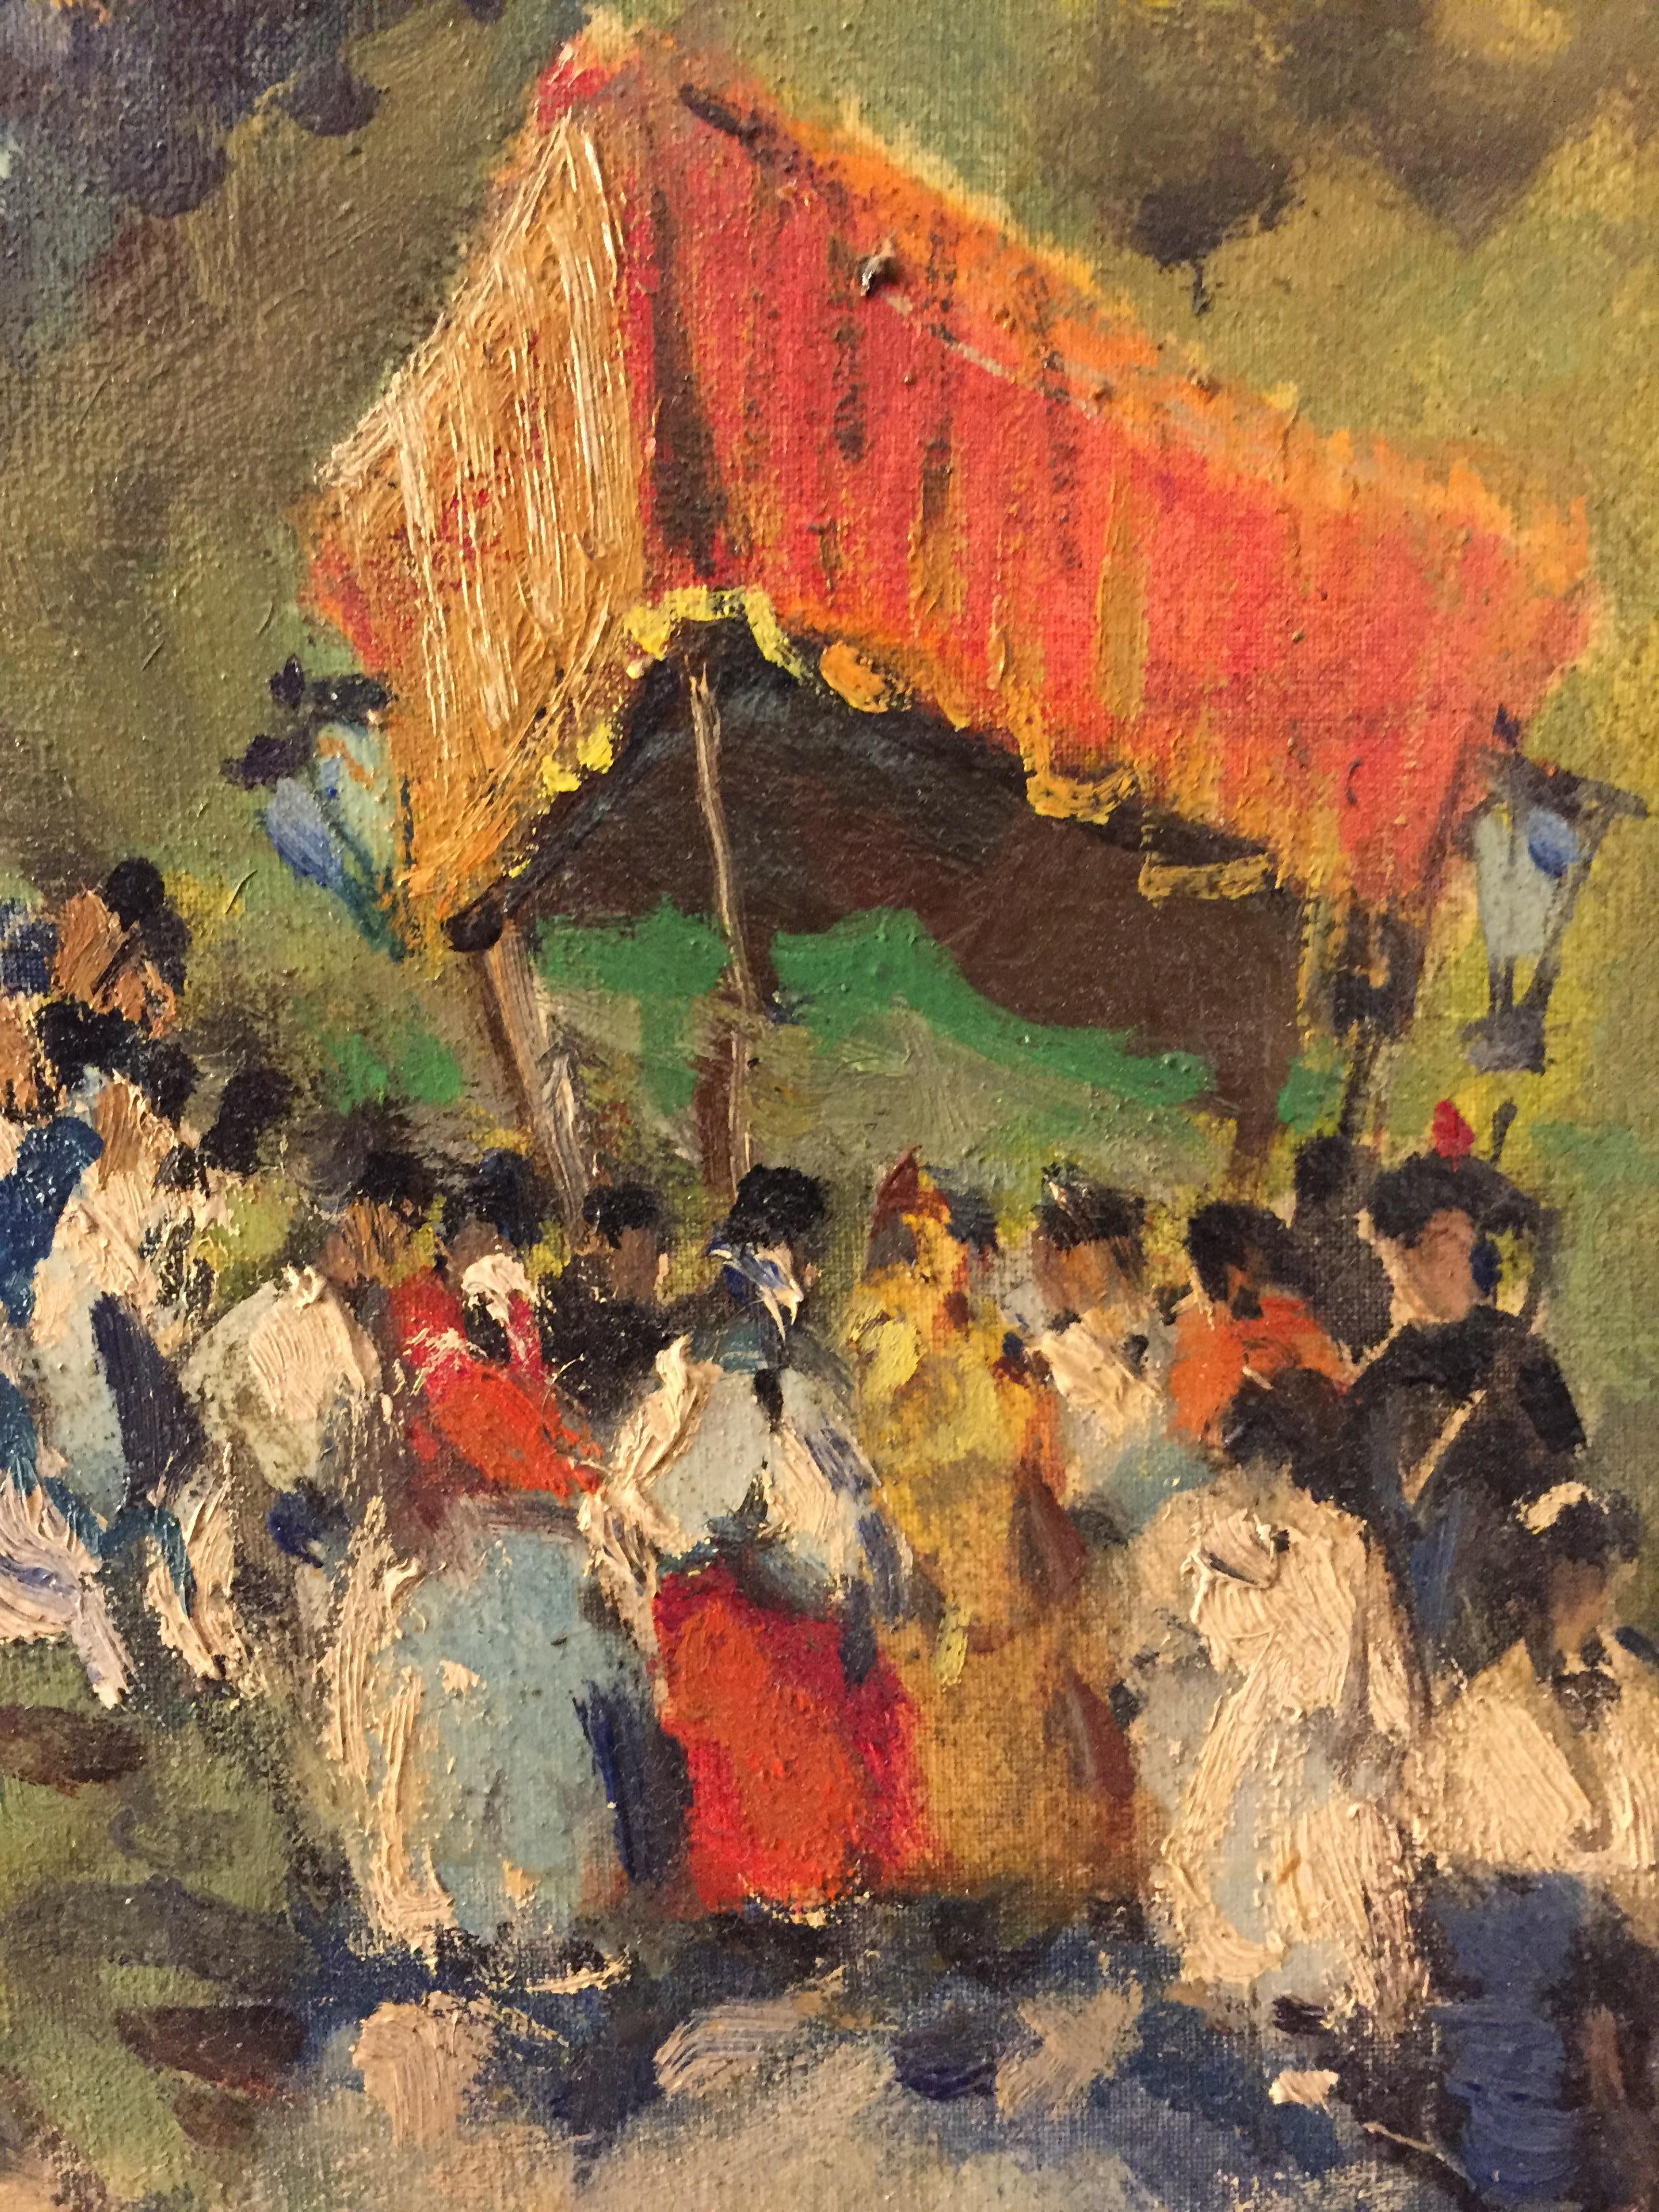 From Italy an original colorful oil on canvas painting by Cirano Castelfranchi depicting a religious procession along a mountain path, dated 1963. On the back of the signature: Corpus Domini passes St. James. Fraele Lake 1963. C. Castelfranchi, we